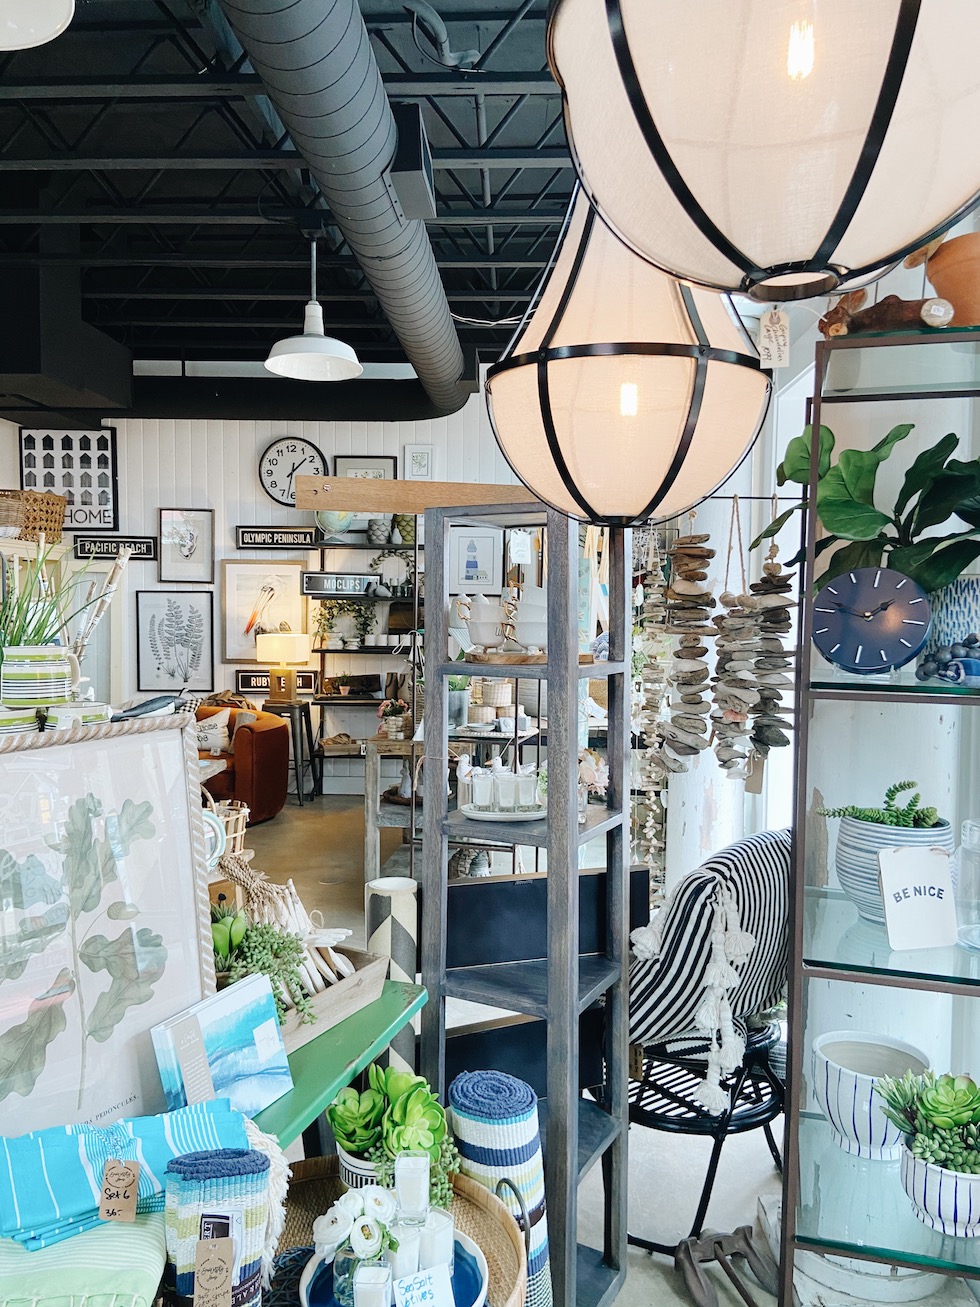 Out to See: Seaworthy Home Shop in Seabrook